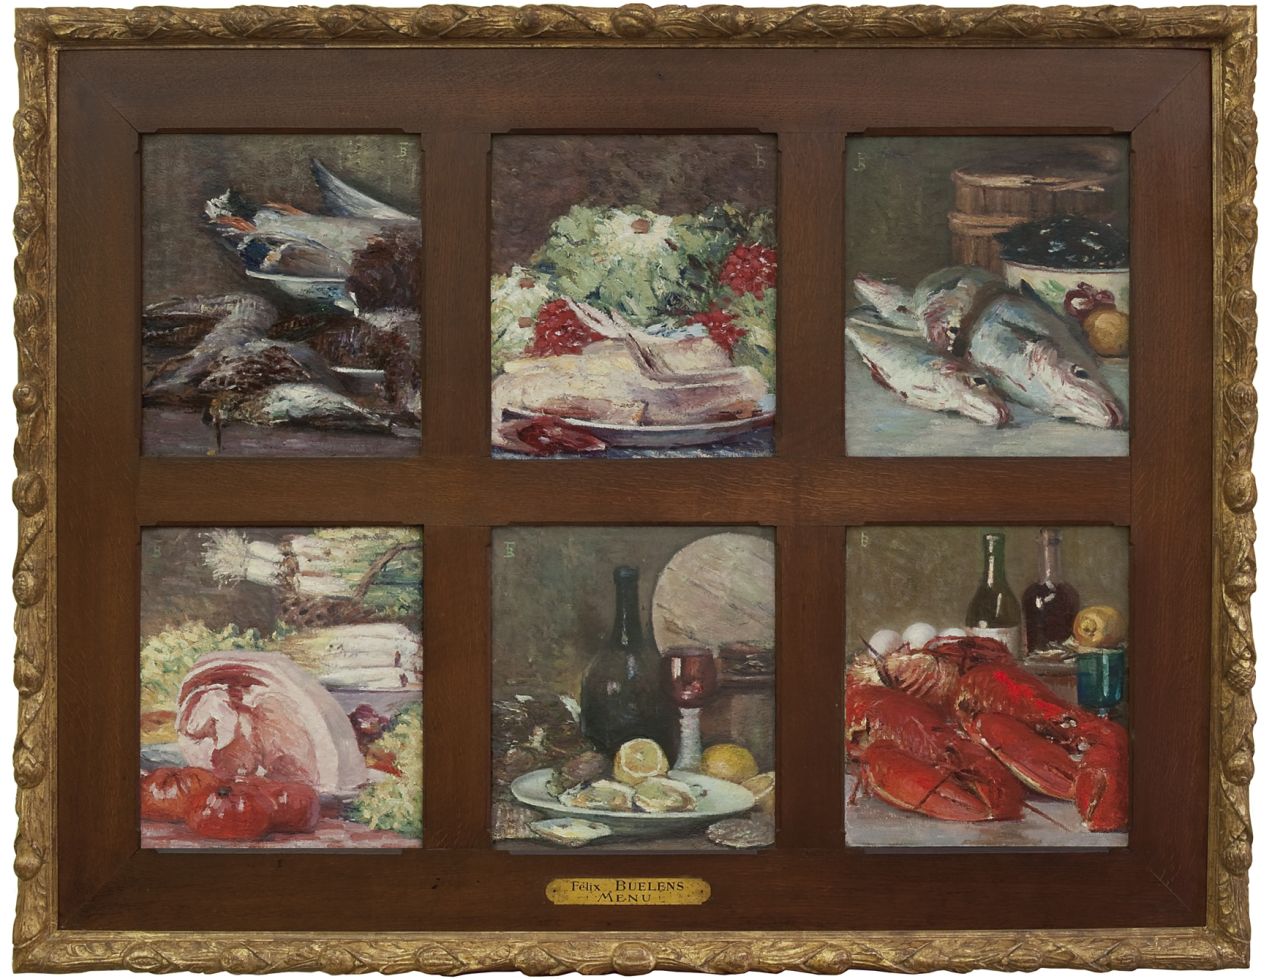 Buelens M.F.  | Michel 'Félix' Buelens, Menu - six paintings in one frame, oil on canvas 40.2 x 35.4 cm, signed u.l. or u.r. with monogram and painted ca. 1905